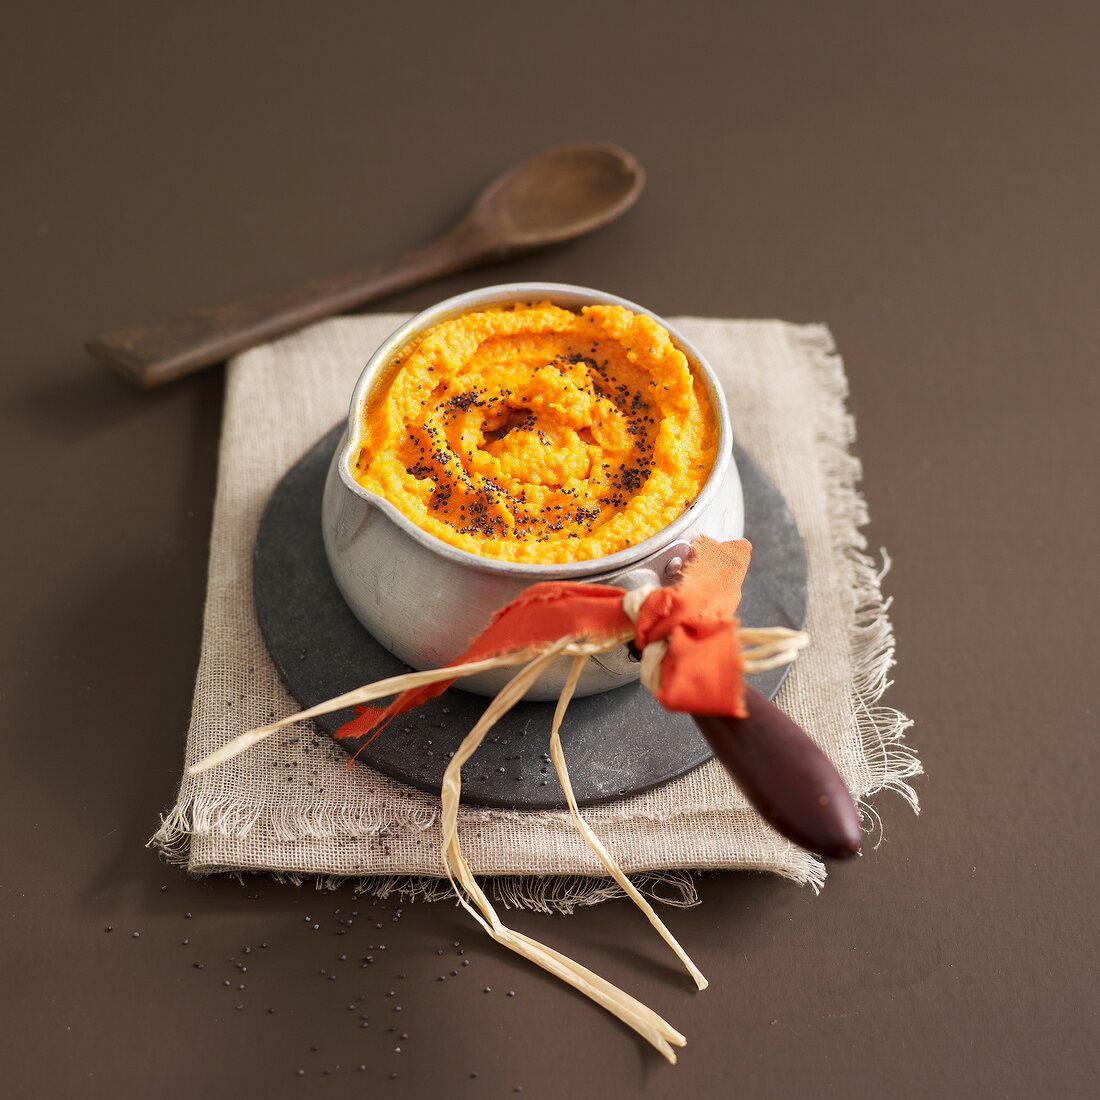 Carrot puree with poppyseeds